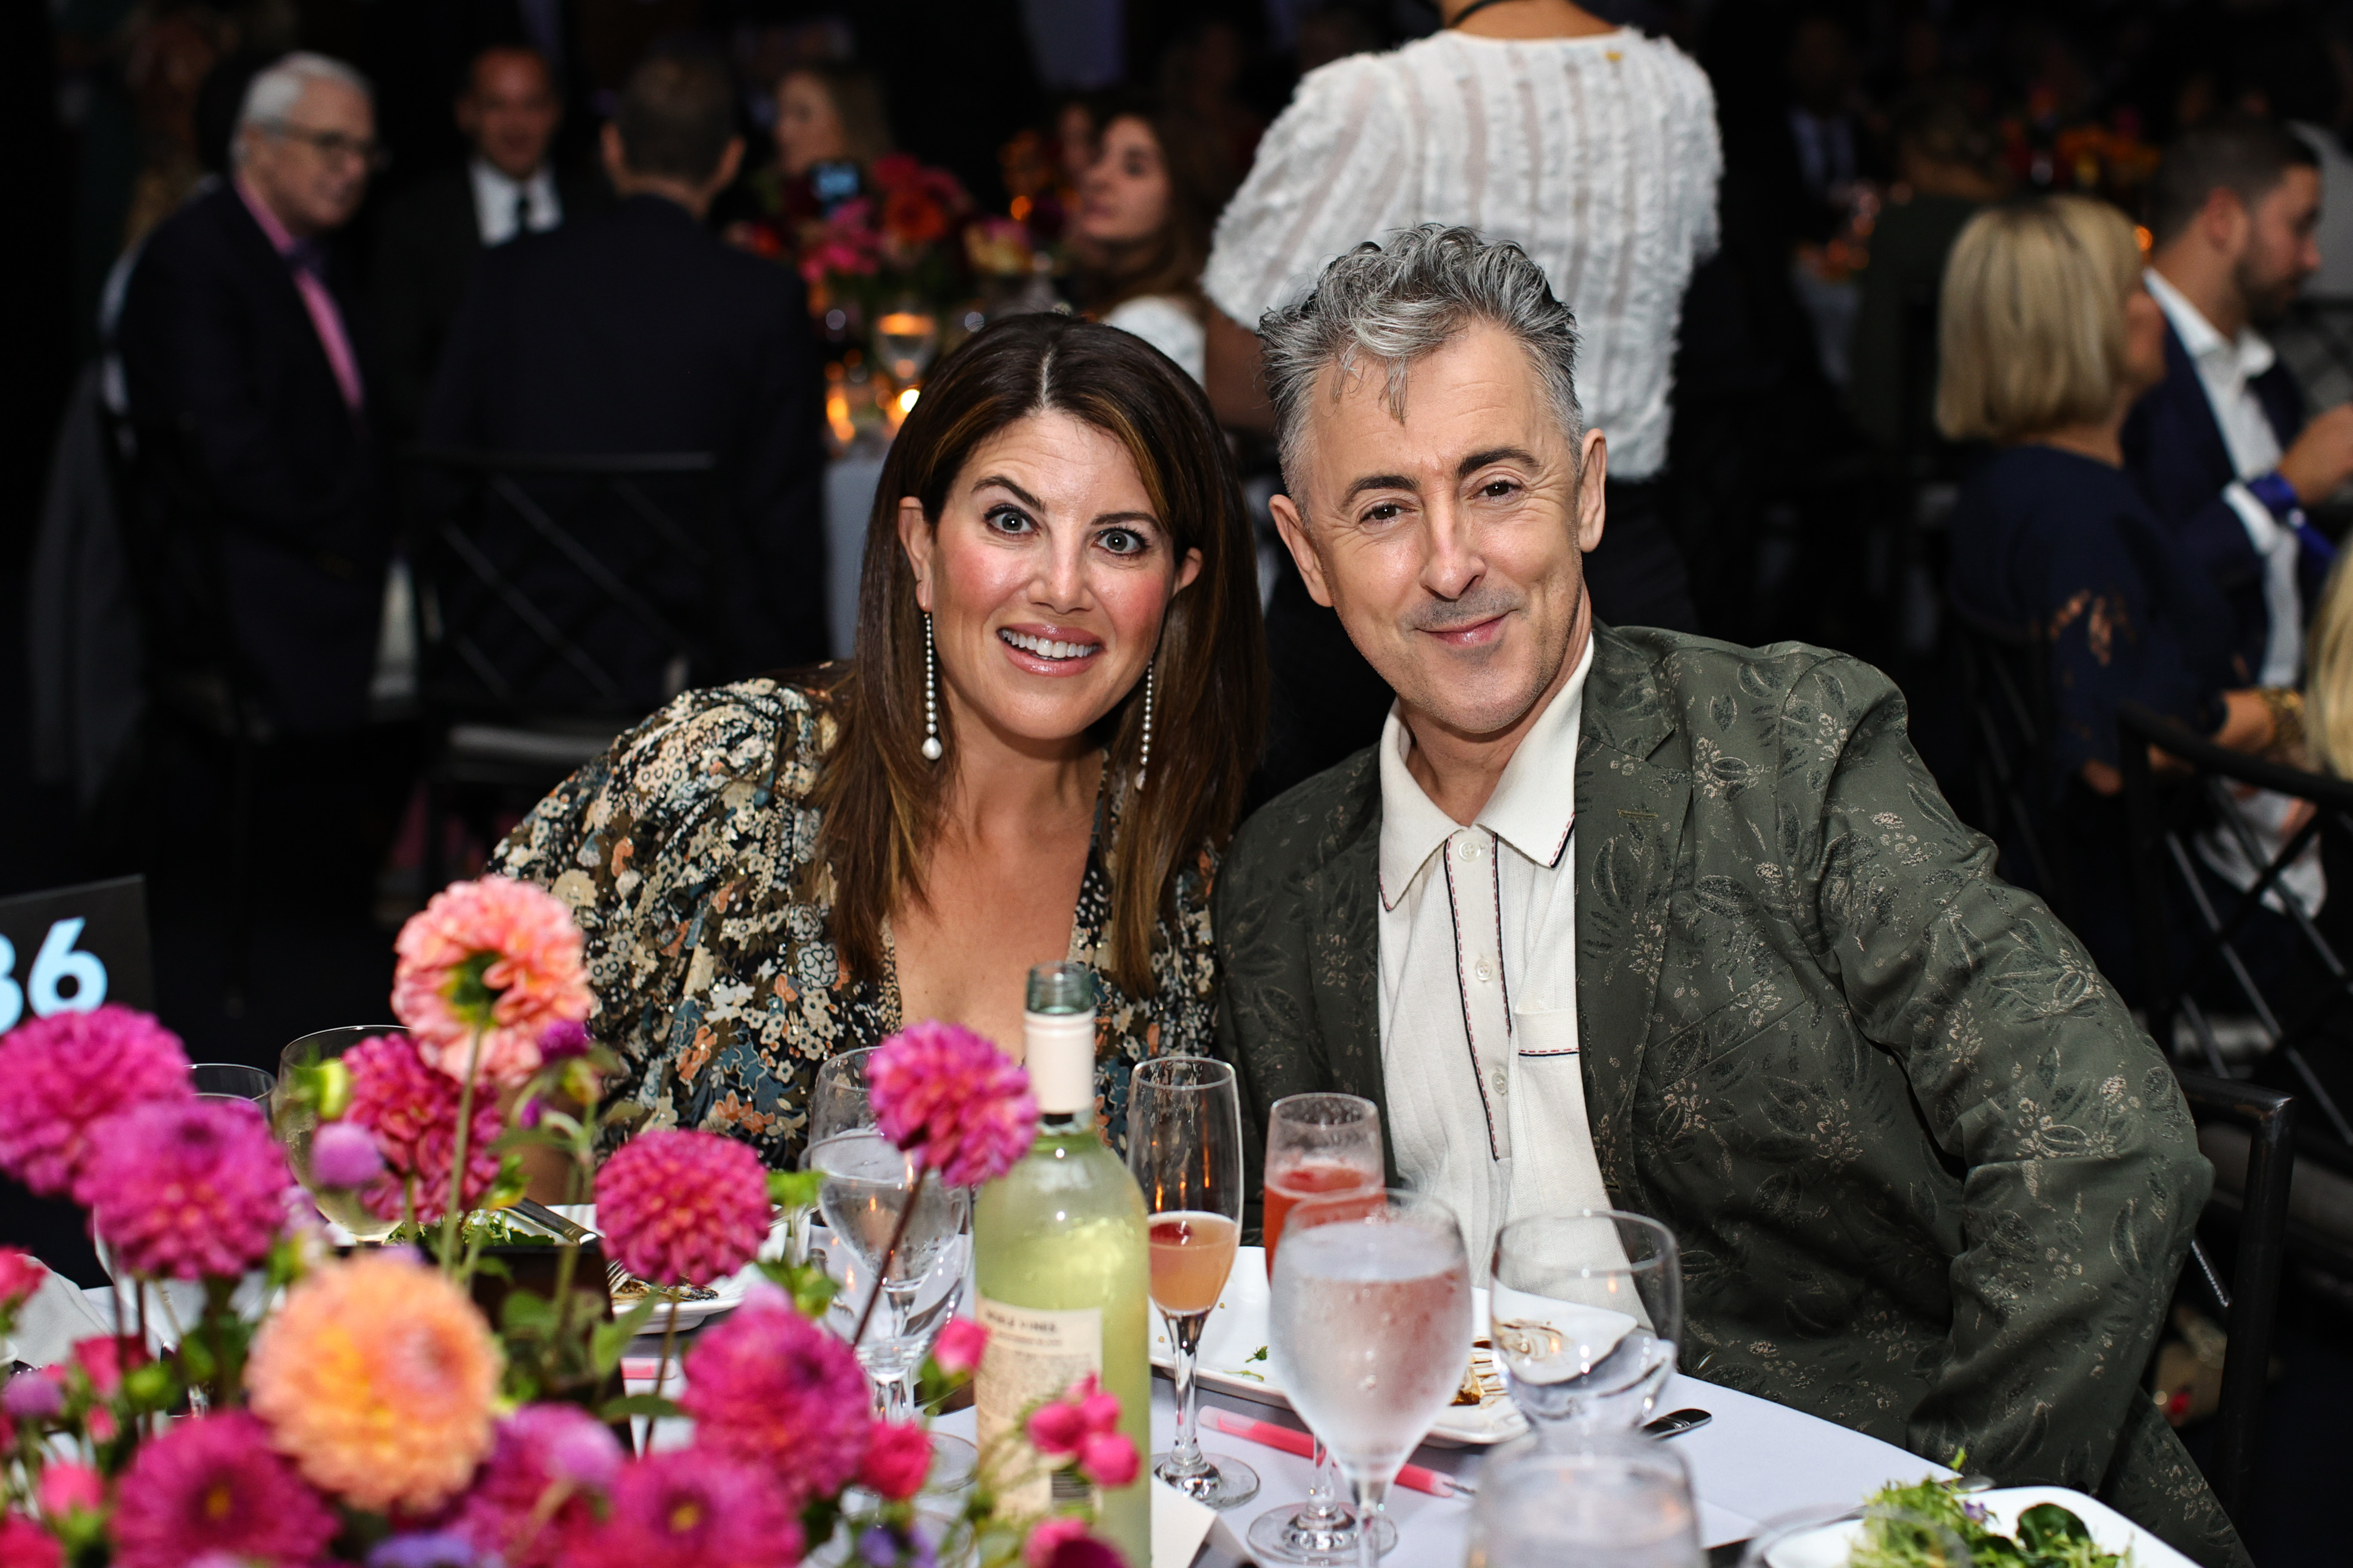 Monica Lewinsky and Alan Cumming at the 2021 Hudson River Park Gala at Pier Sixty at Chelsea Piers on October 7, 2021 in New York City. | Source: Getty Images